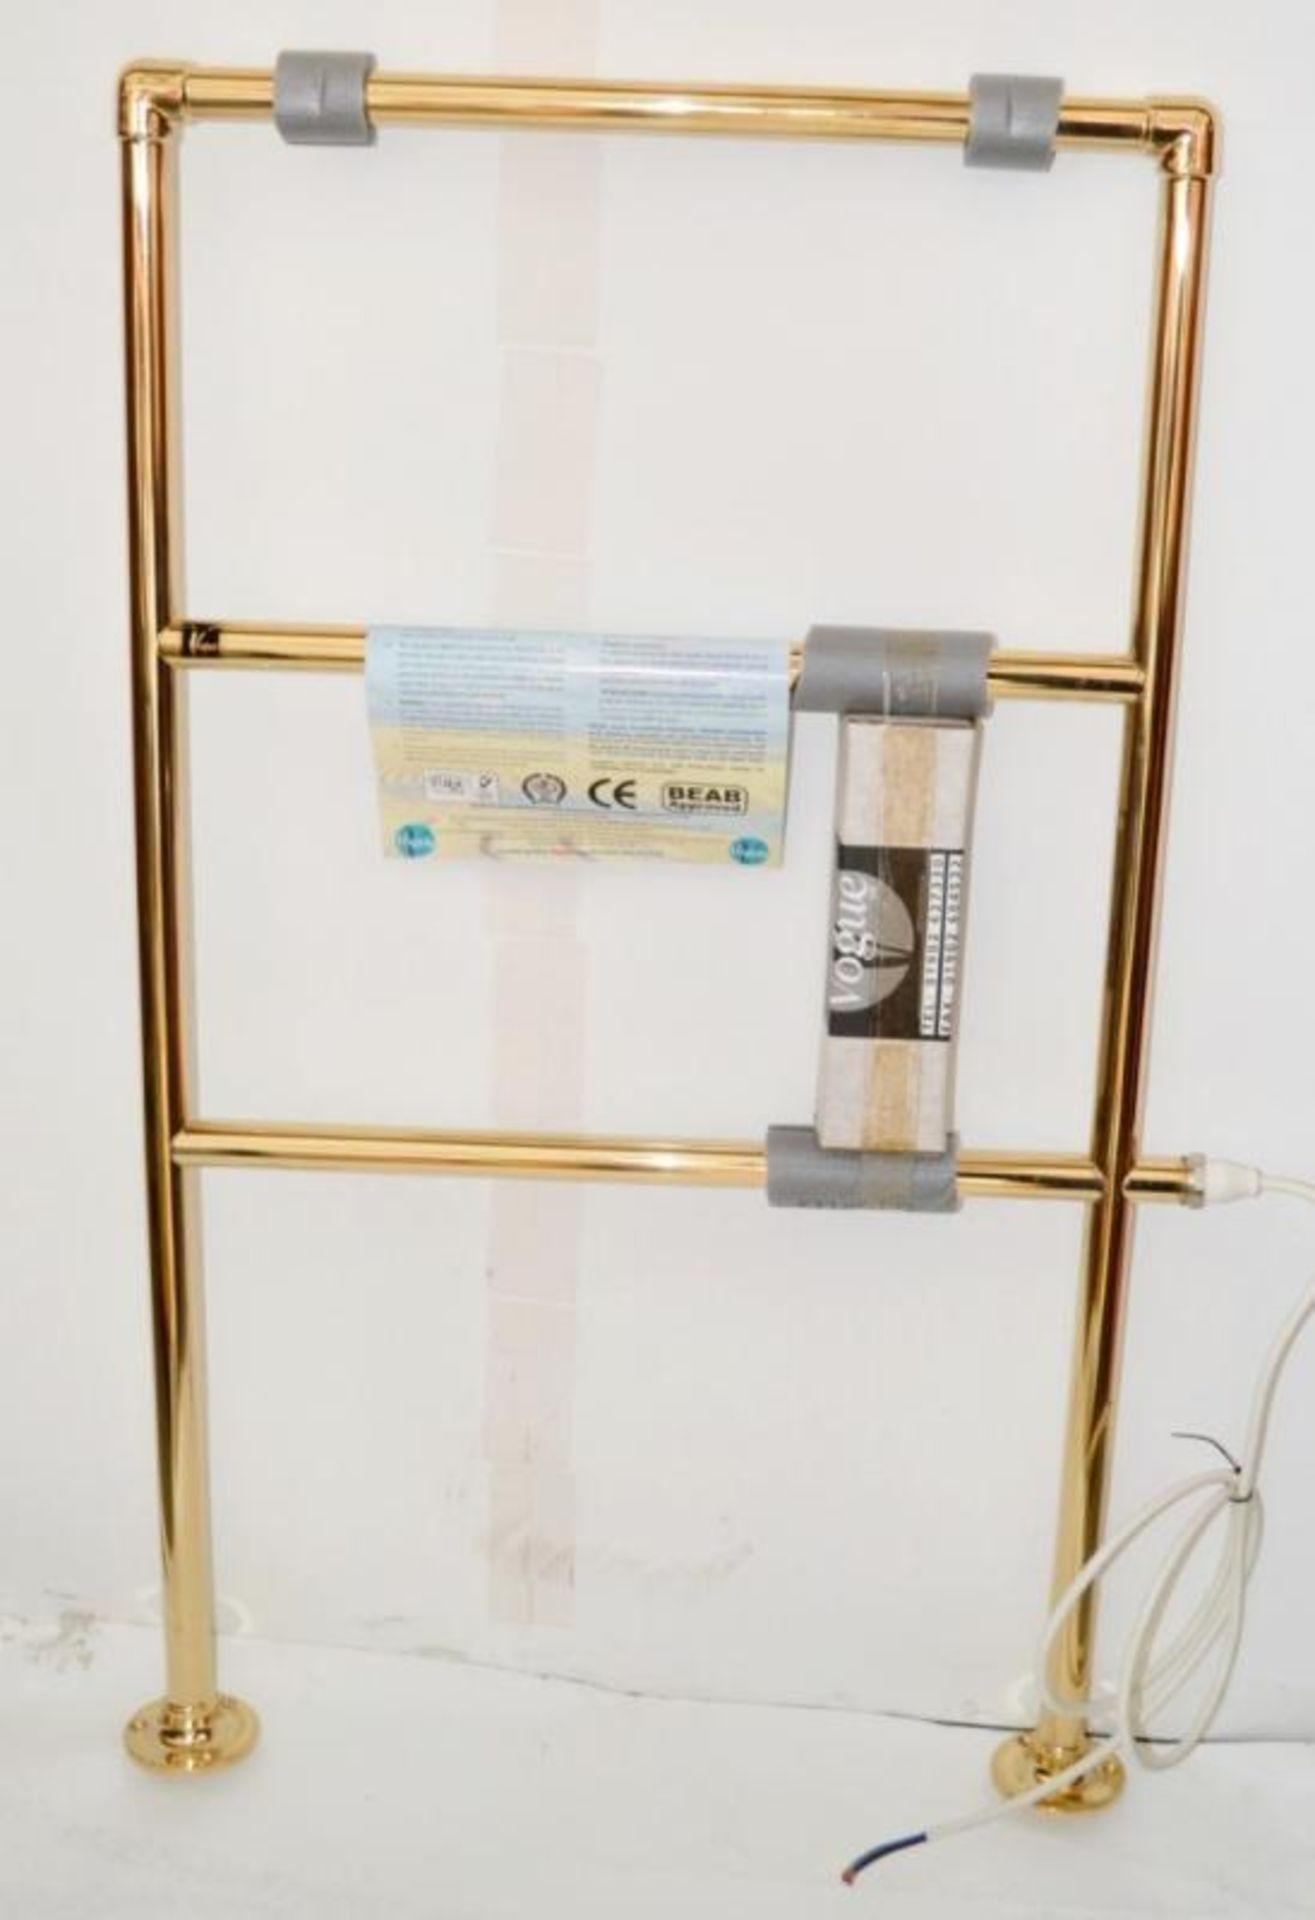 1 x Vogue Electric Heated Towel Rail - New / Boxed Stock - Bright Brass Finish - Dimensions: 52 x 92